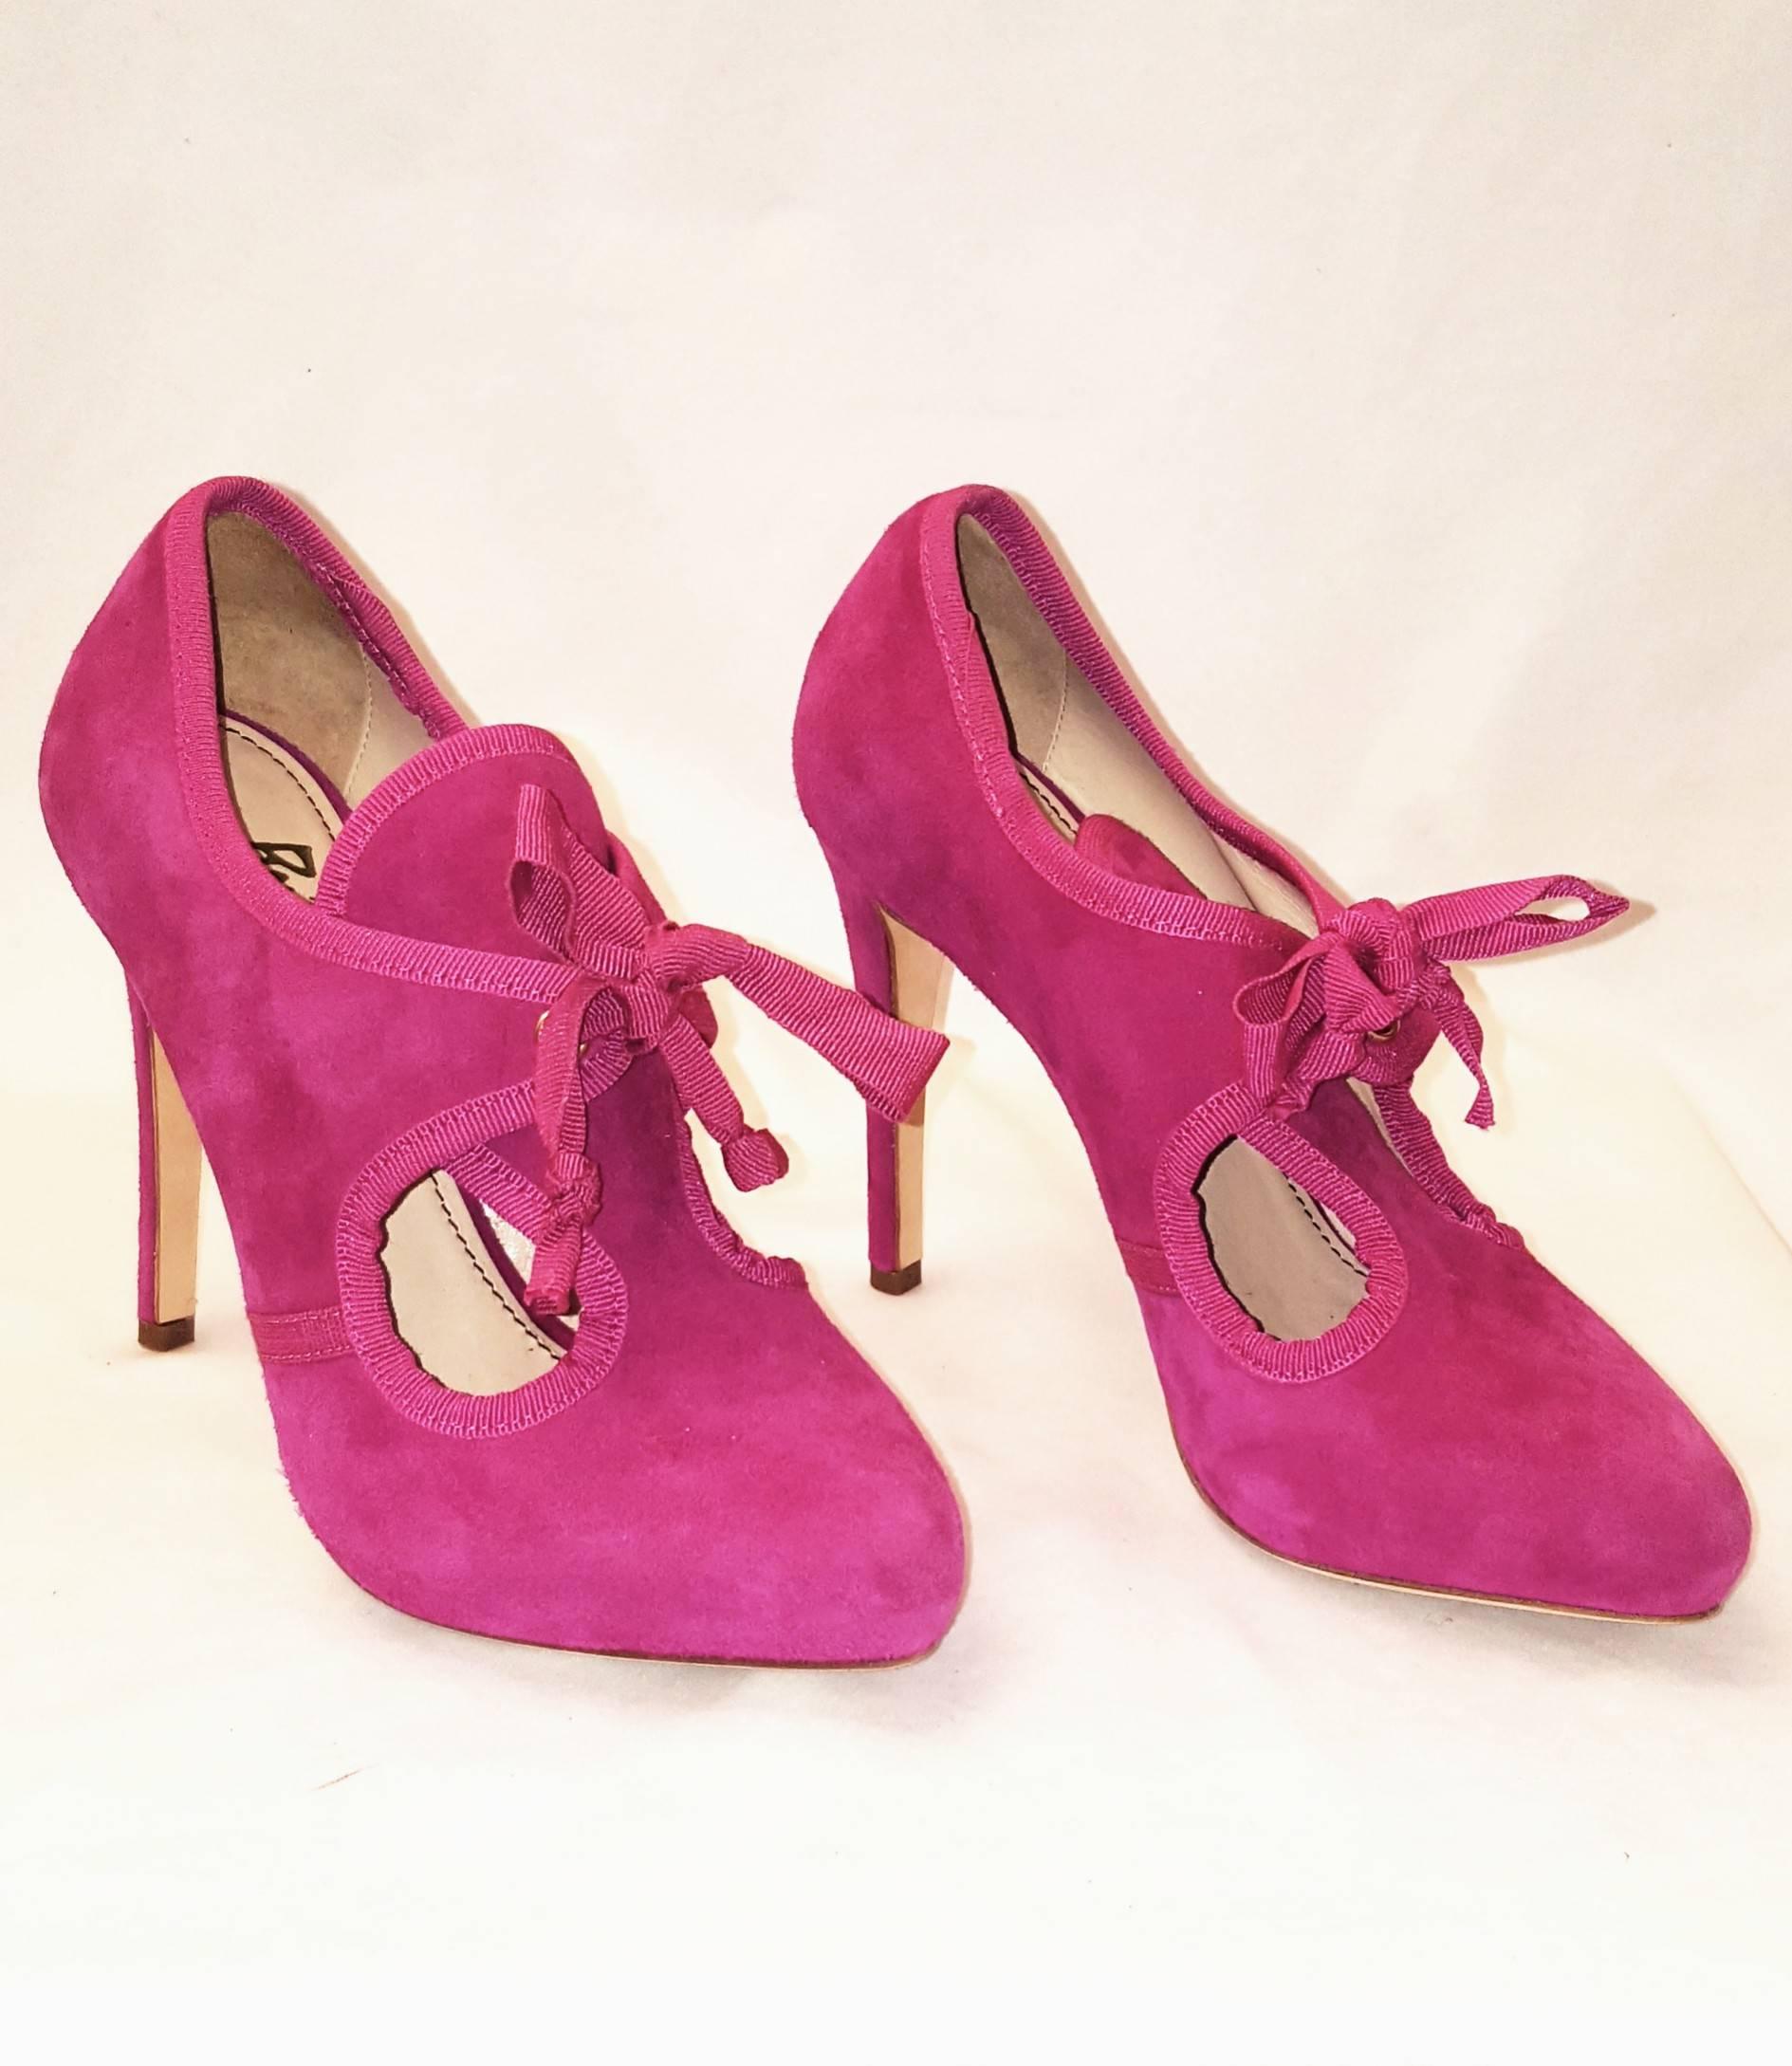 Pink Jerome C. Rousseau Fuchia Suede Pumps with Bow Closure For Sale